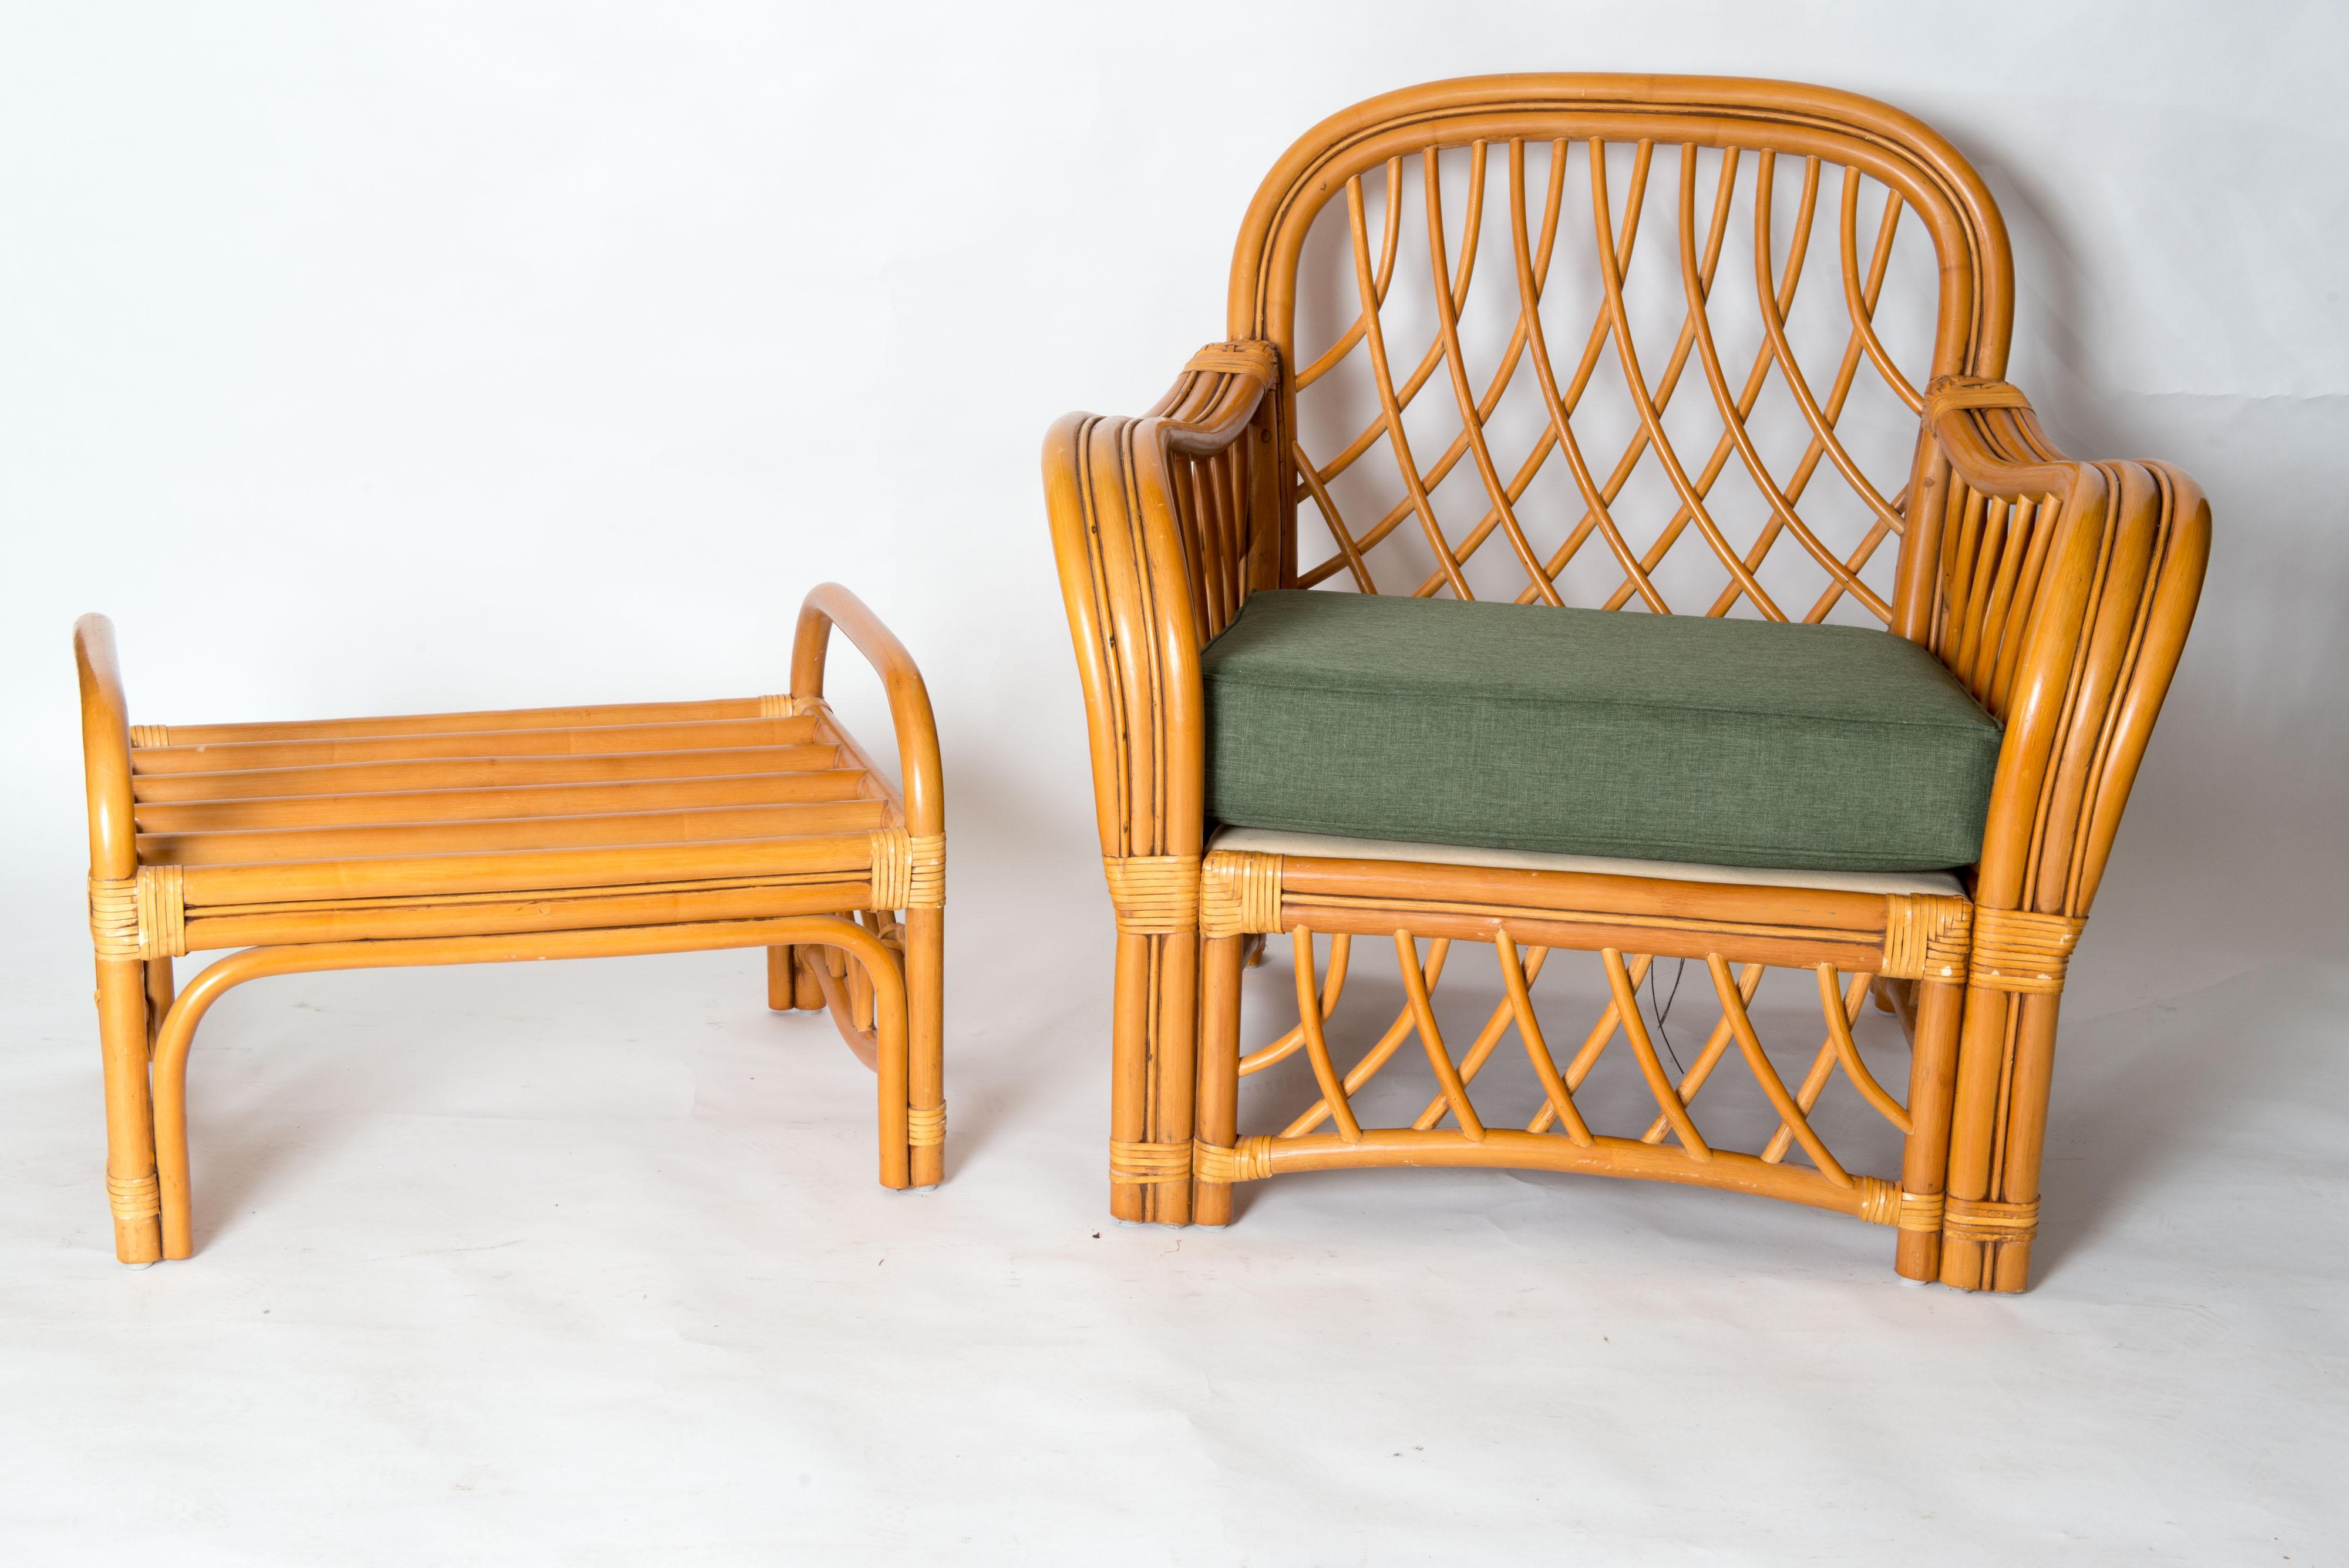 A midcentury, possibly Italian organic modern armchair and ottoman in handcrafted rattan. They are strong and sturdy woven diamond pattern rattan armchair and ottoman. These pieces are in good to excellent condition. This Classic design compliments